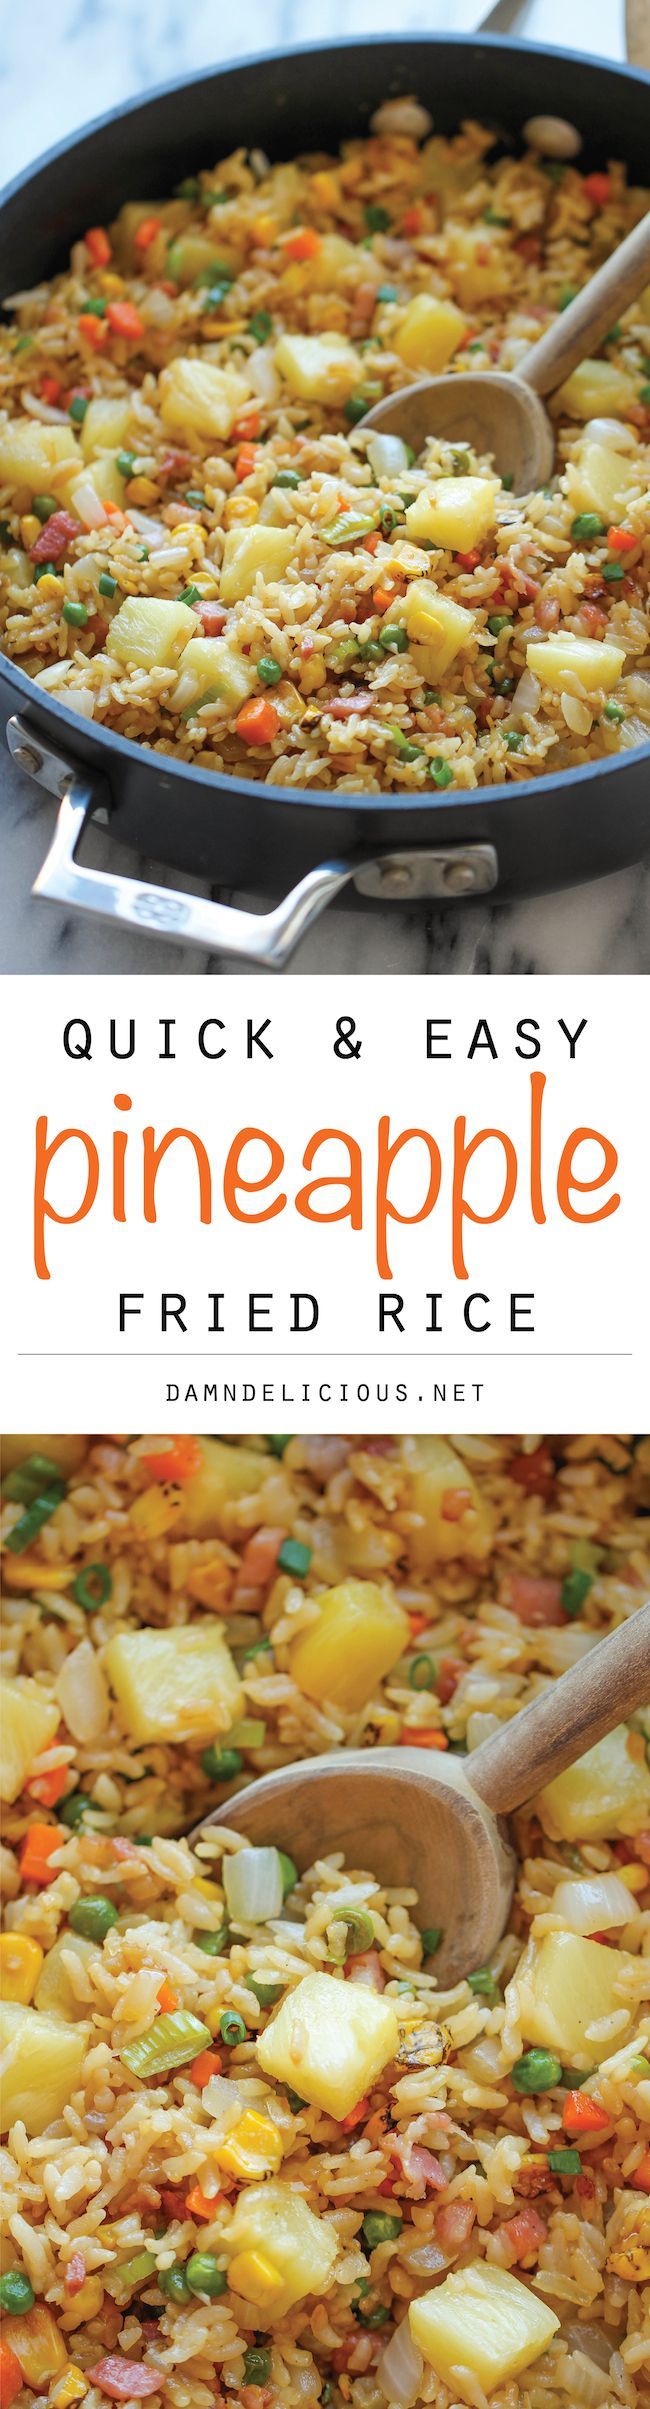 Pineapple Fried Rice – A quick and easy weeknight meal thats so much cheaper, tastier and healthier than take-out!